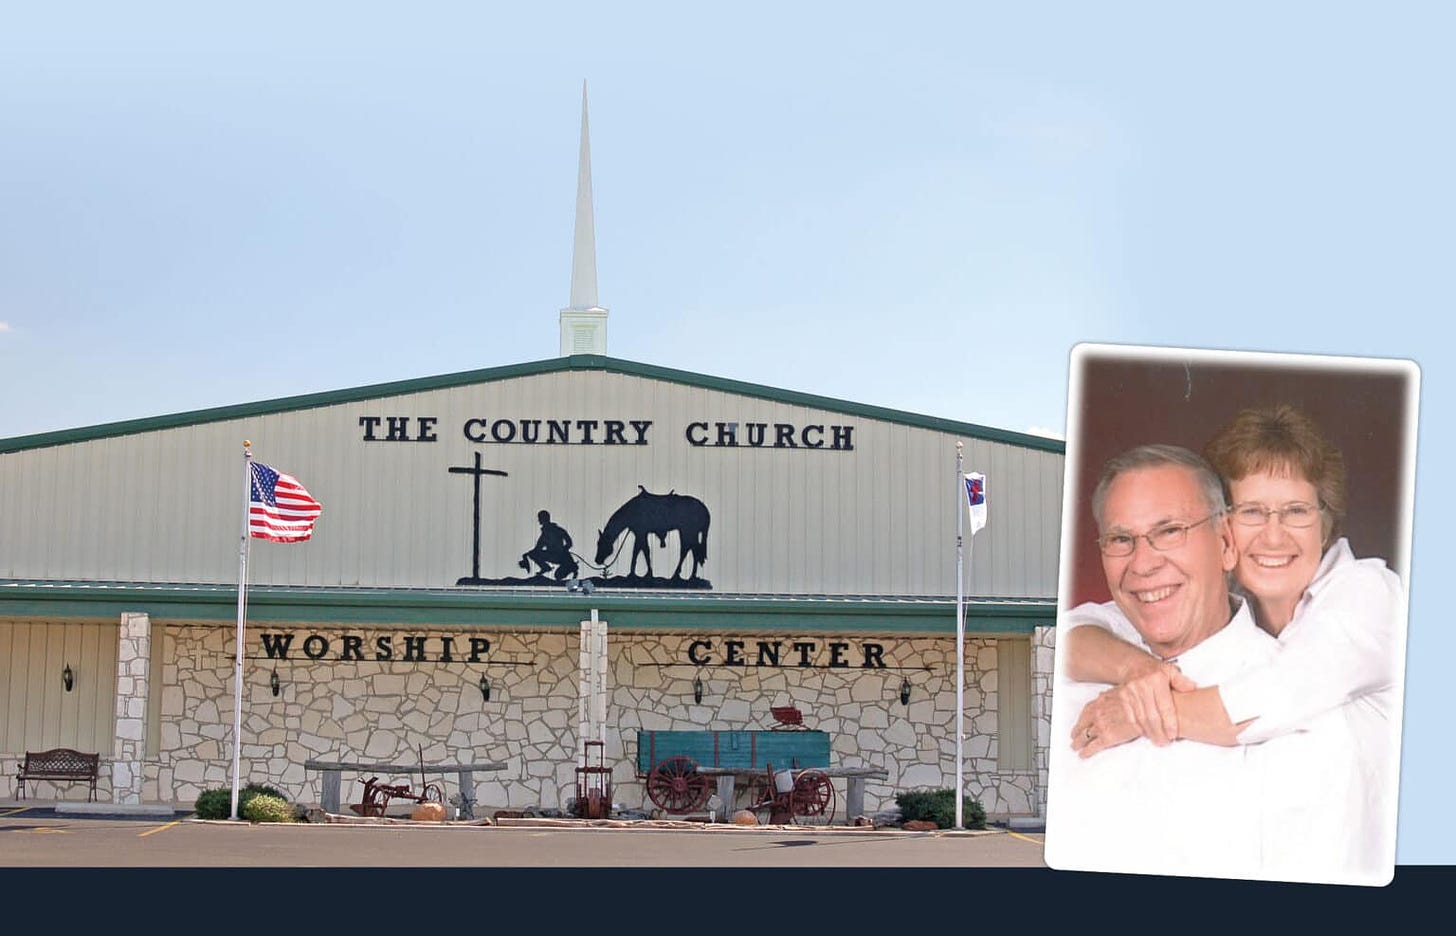 Image of The Country Church in Marion, TX with a picture of Butch and Joan Ikels superimposed.